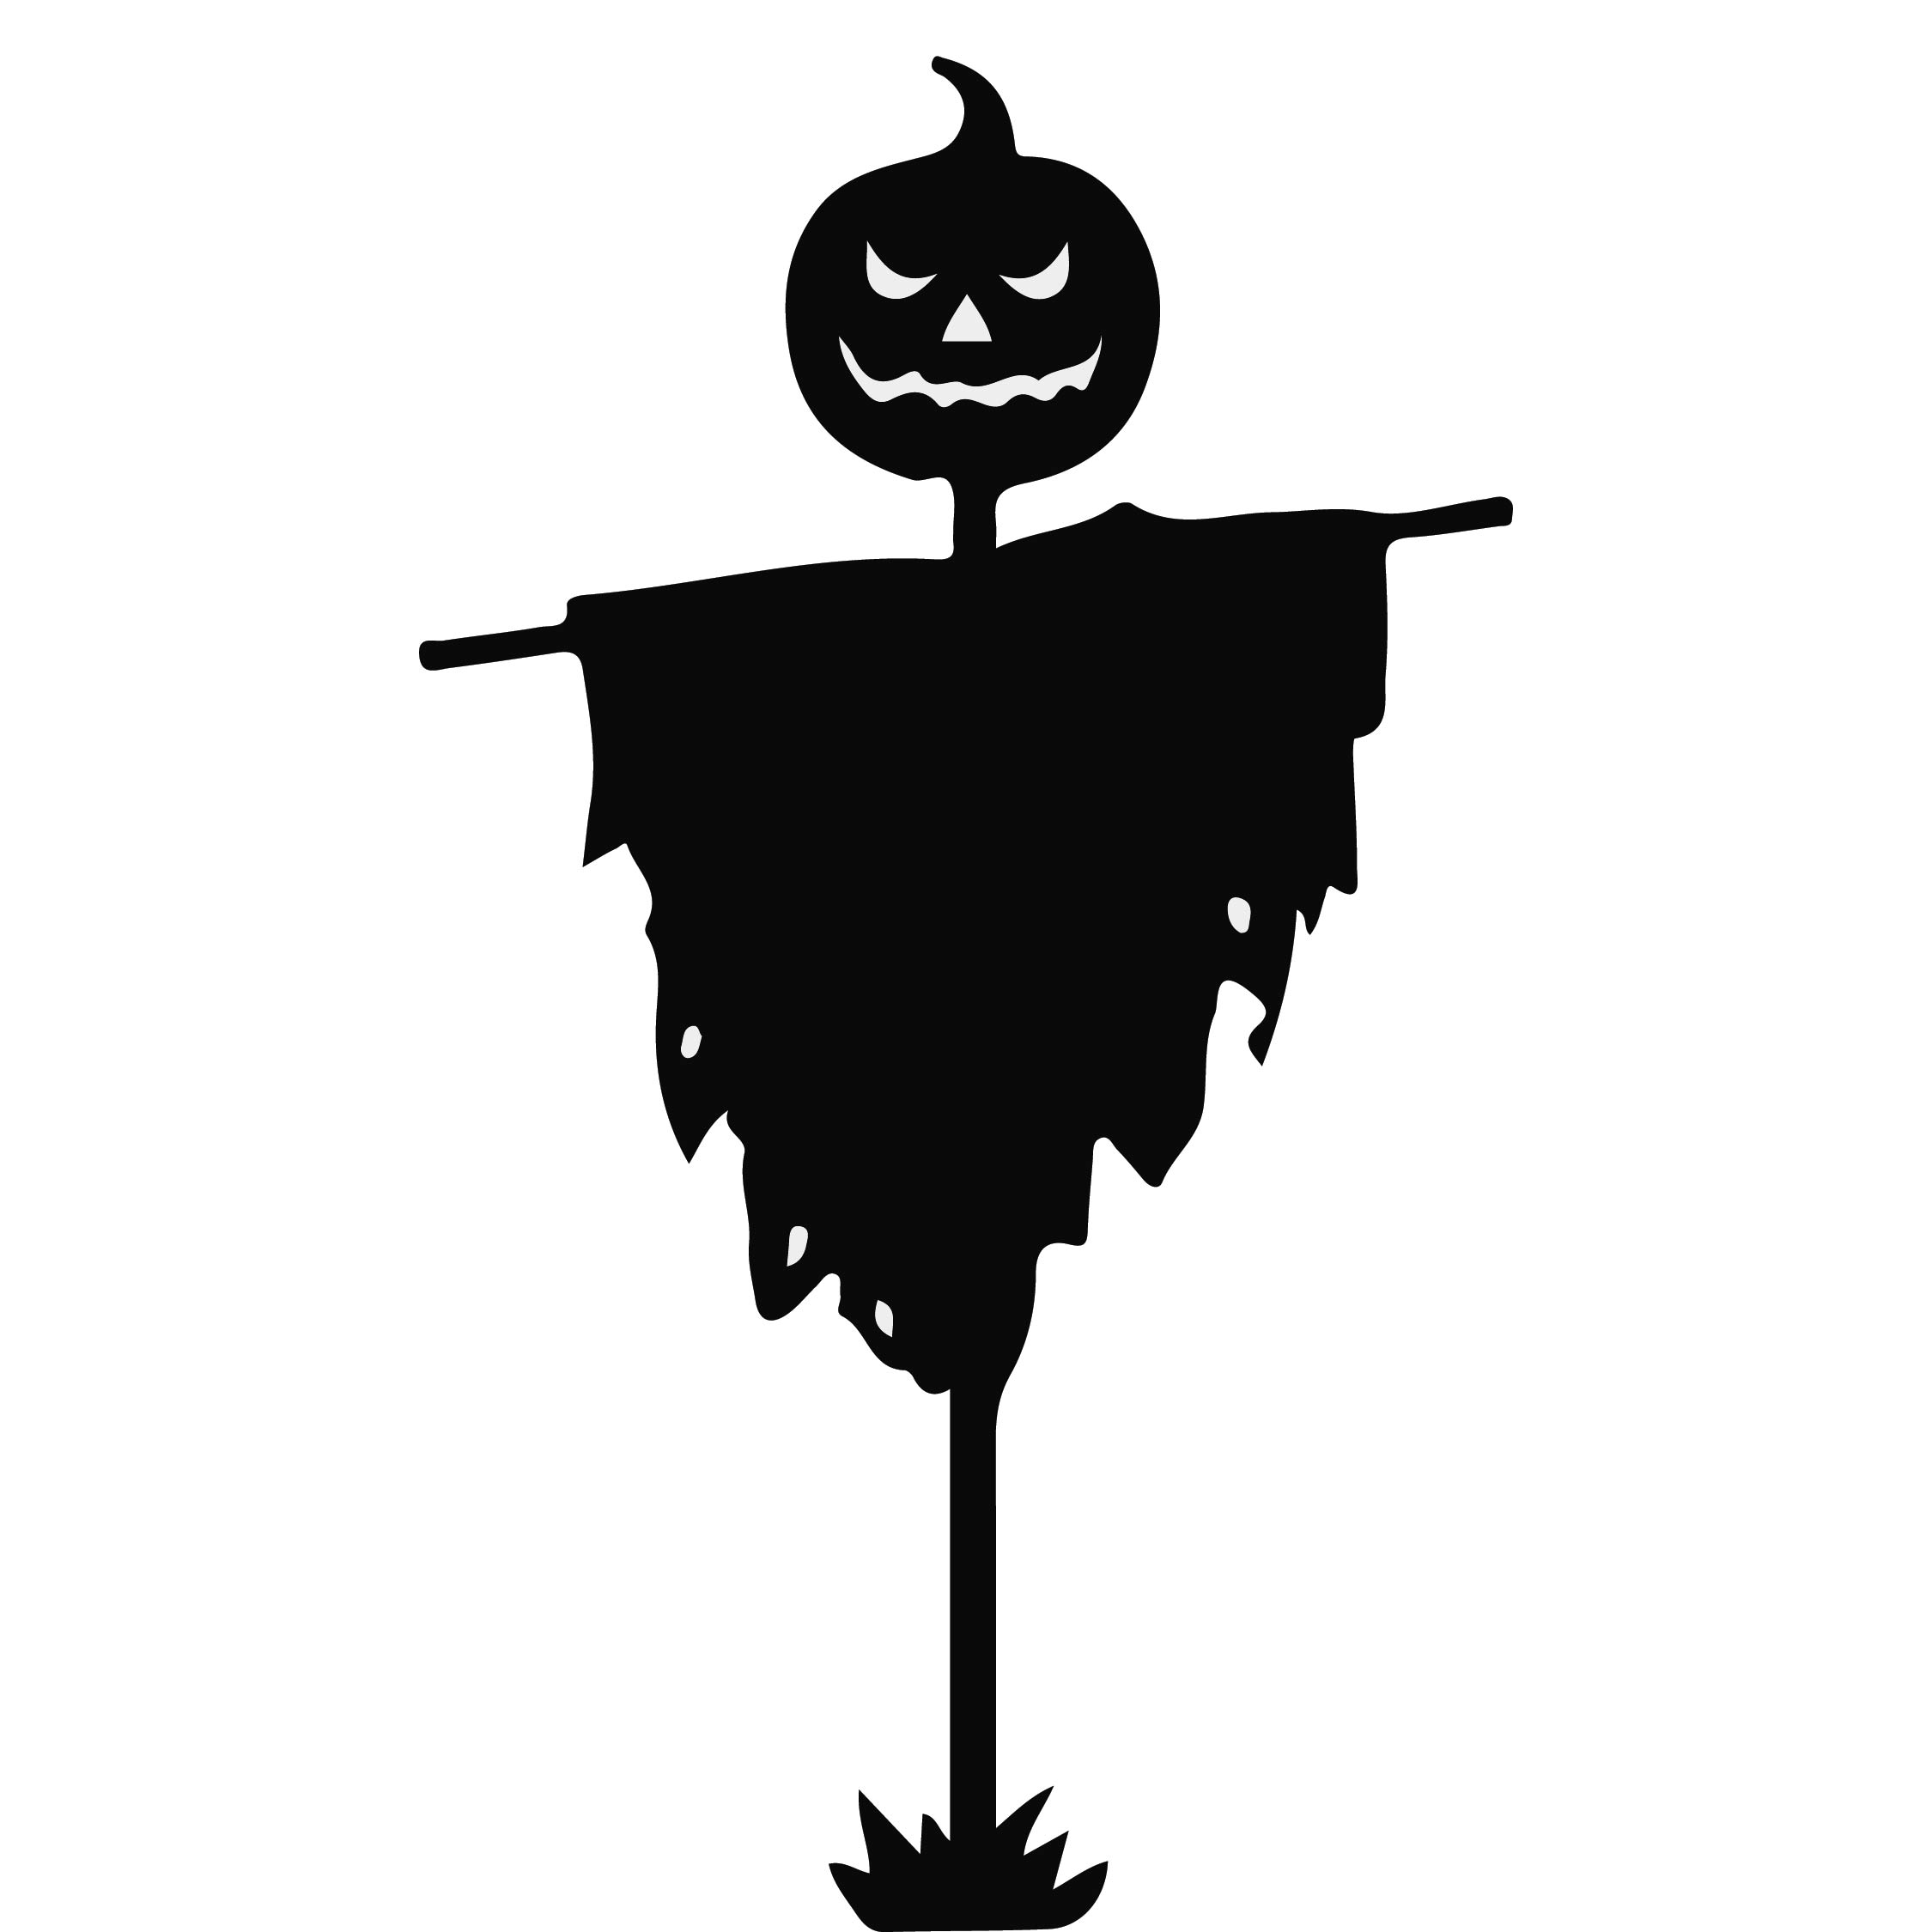 6 Best Images of Printable Halloween Silhouettes - Free Halloween Silhouette Printables